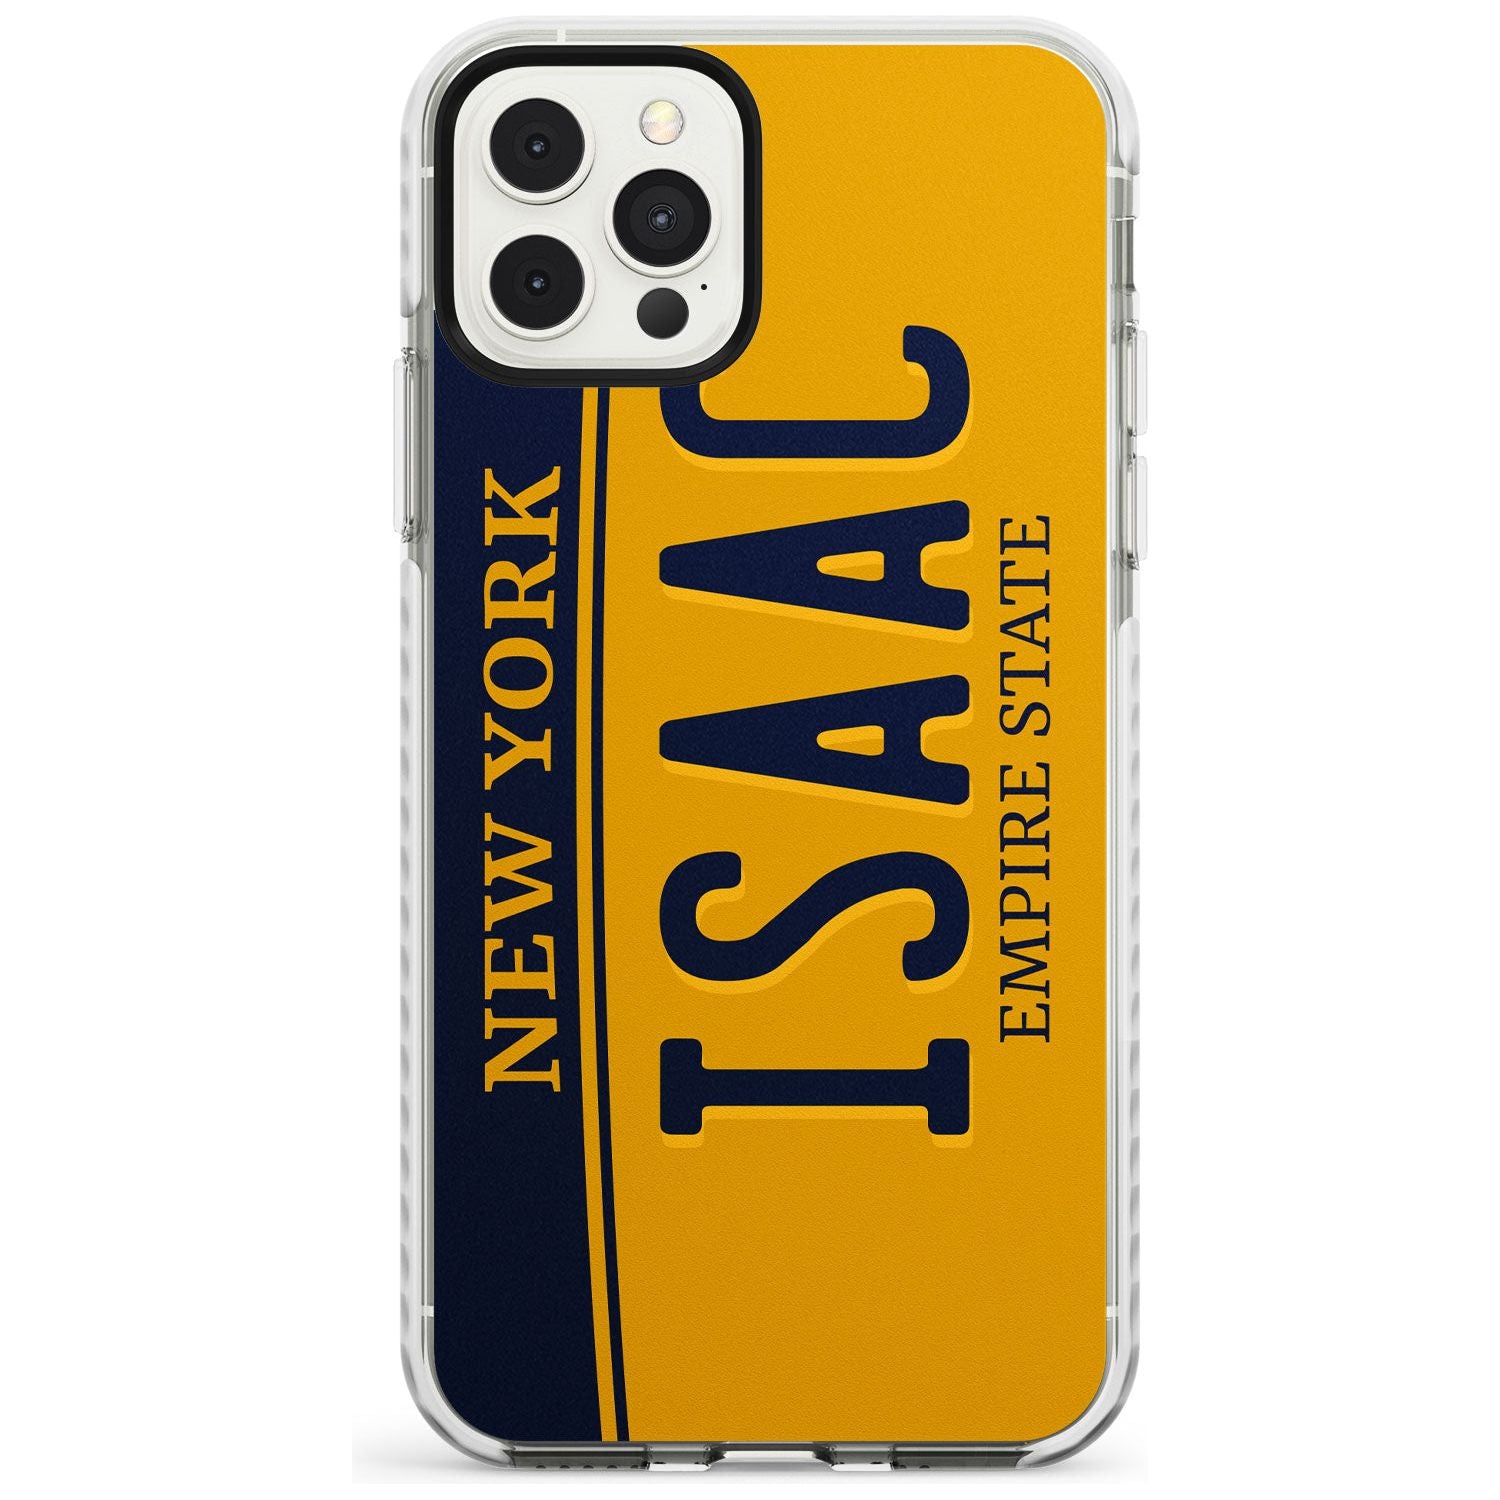 New York License Plate Slim TPU Phone Case for iPhone 11 Pro Max